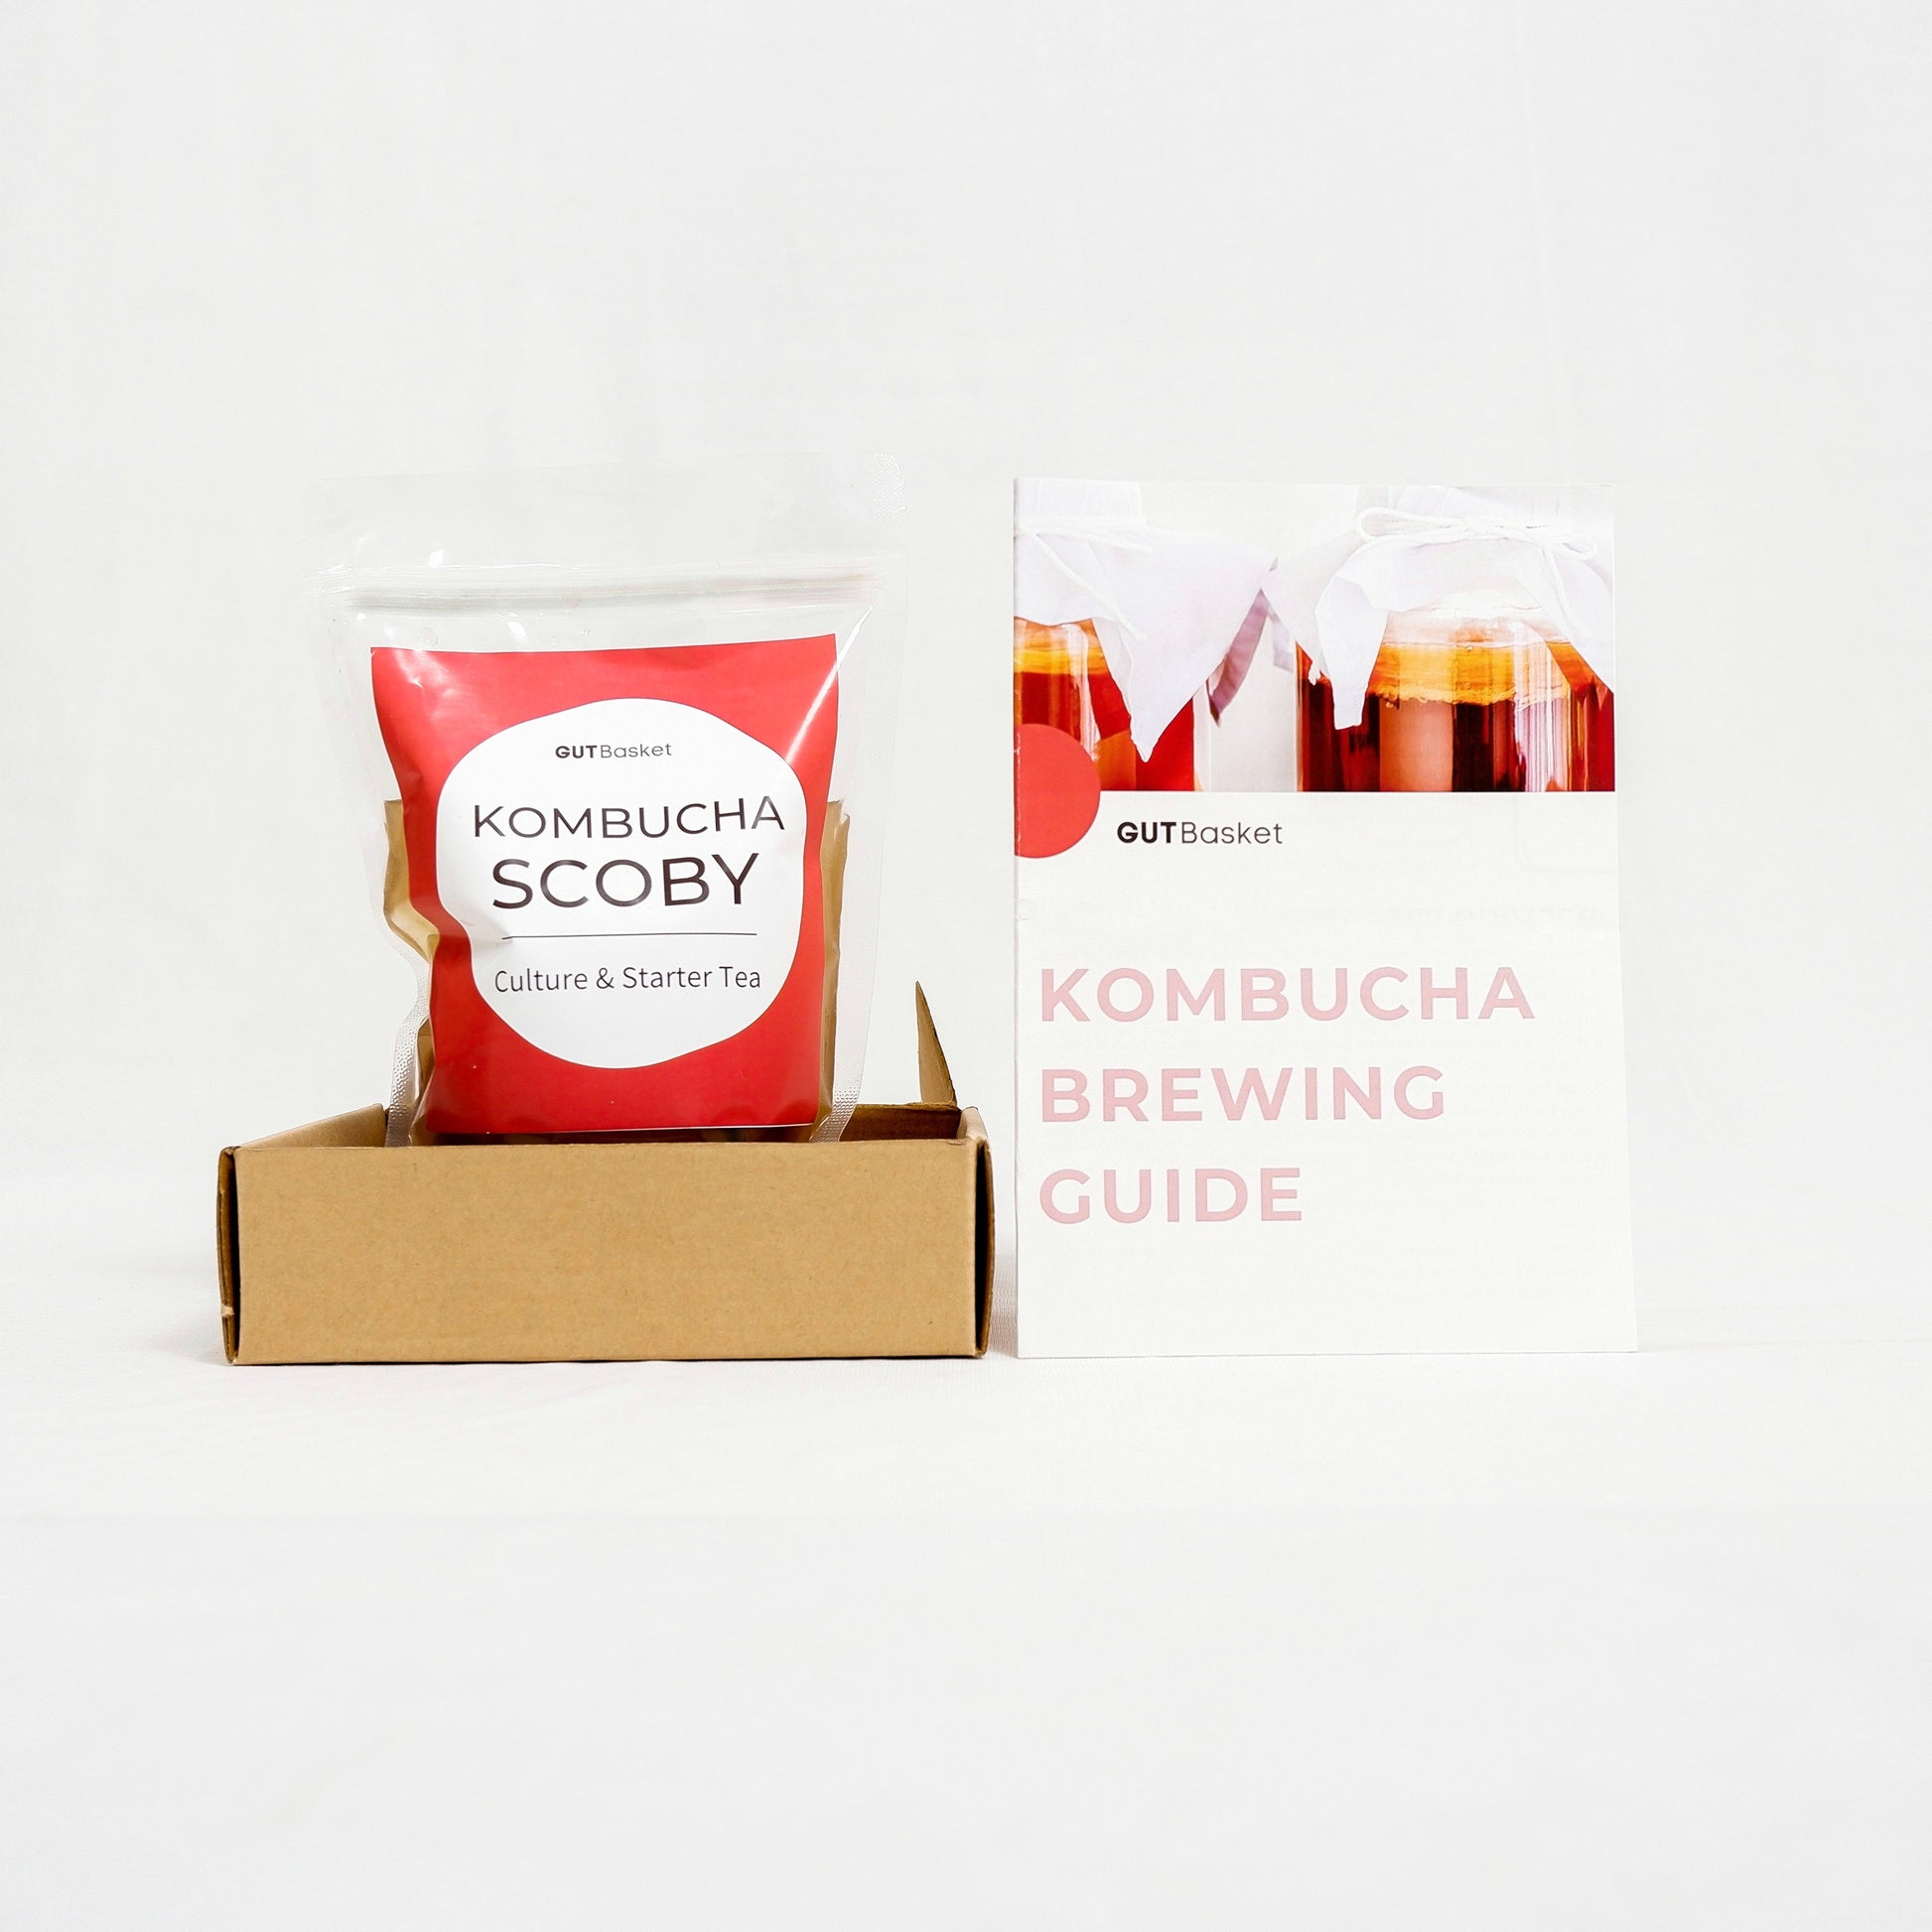 Kombucha Scoby And Stater Tea - Gutbasket